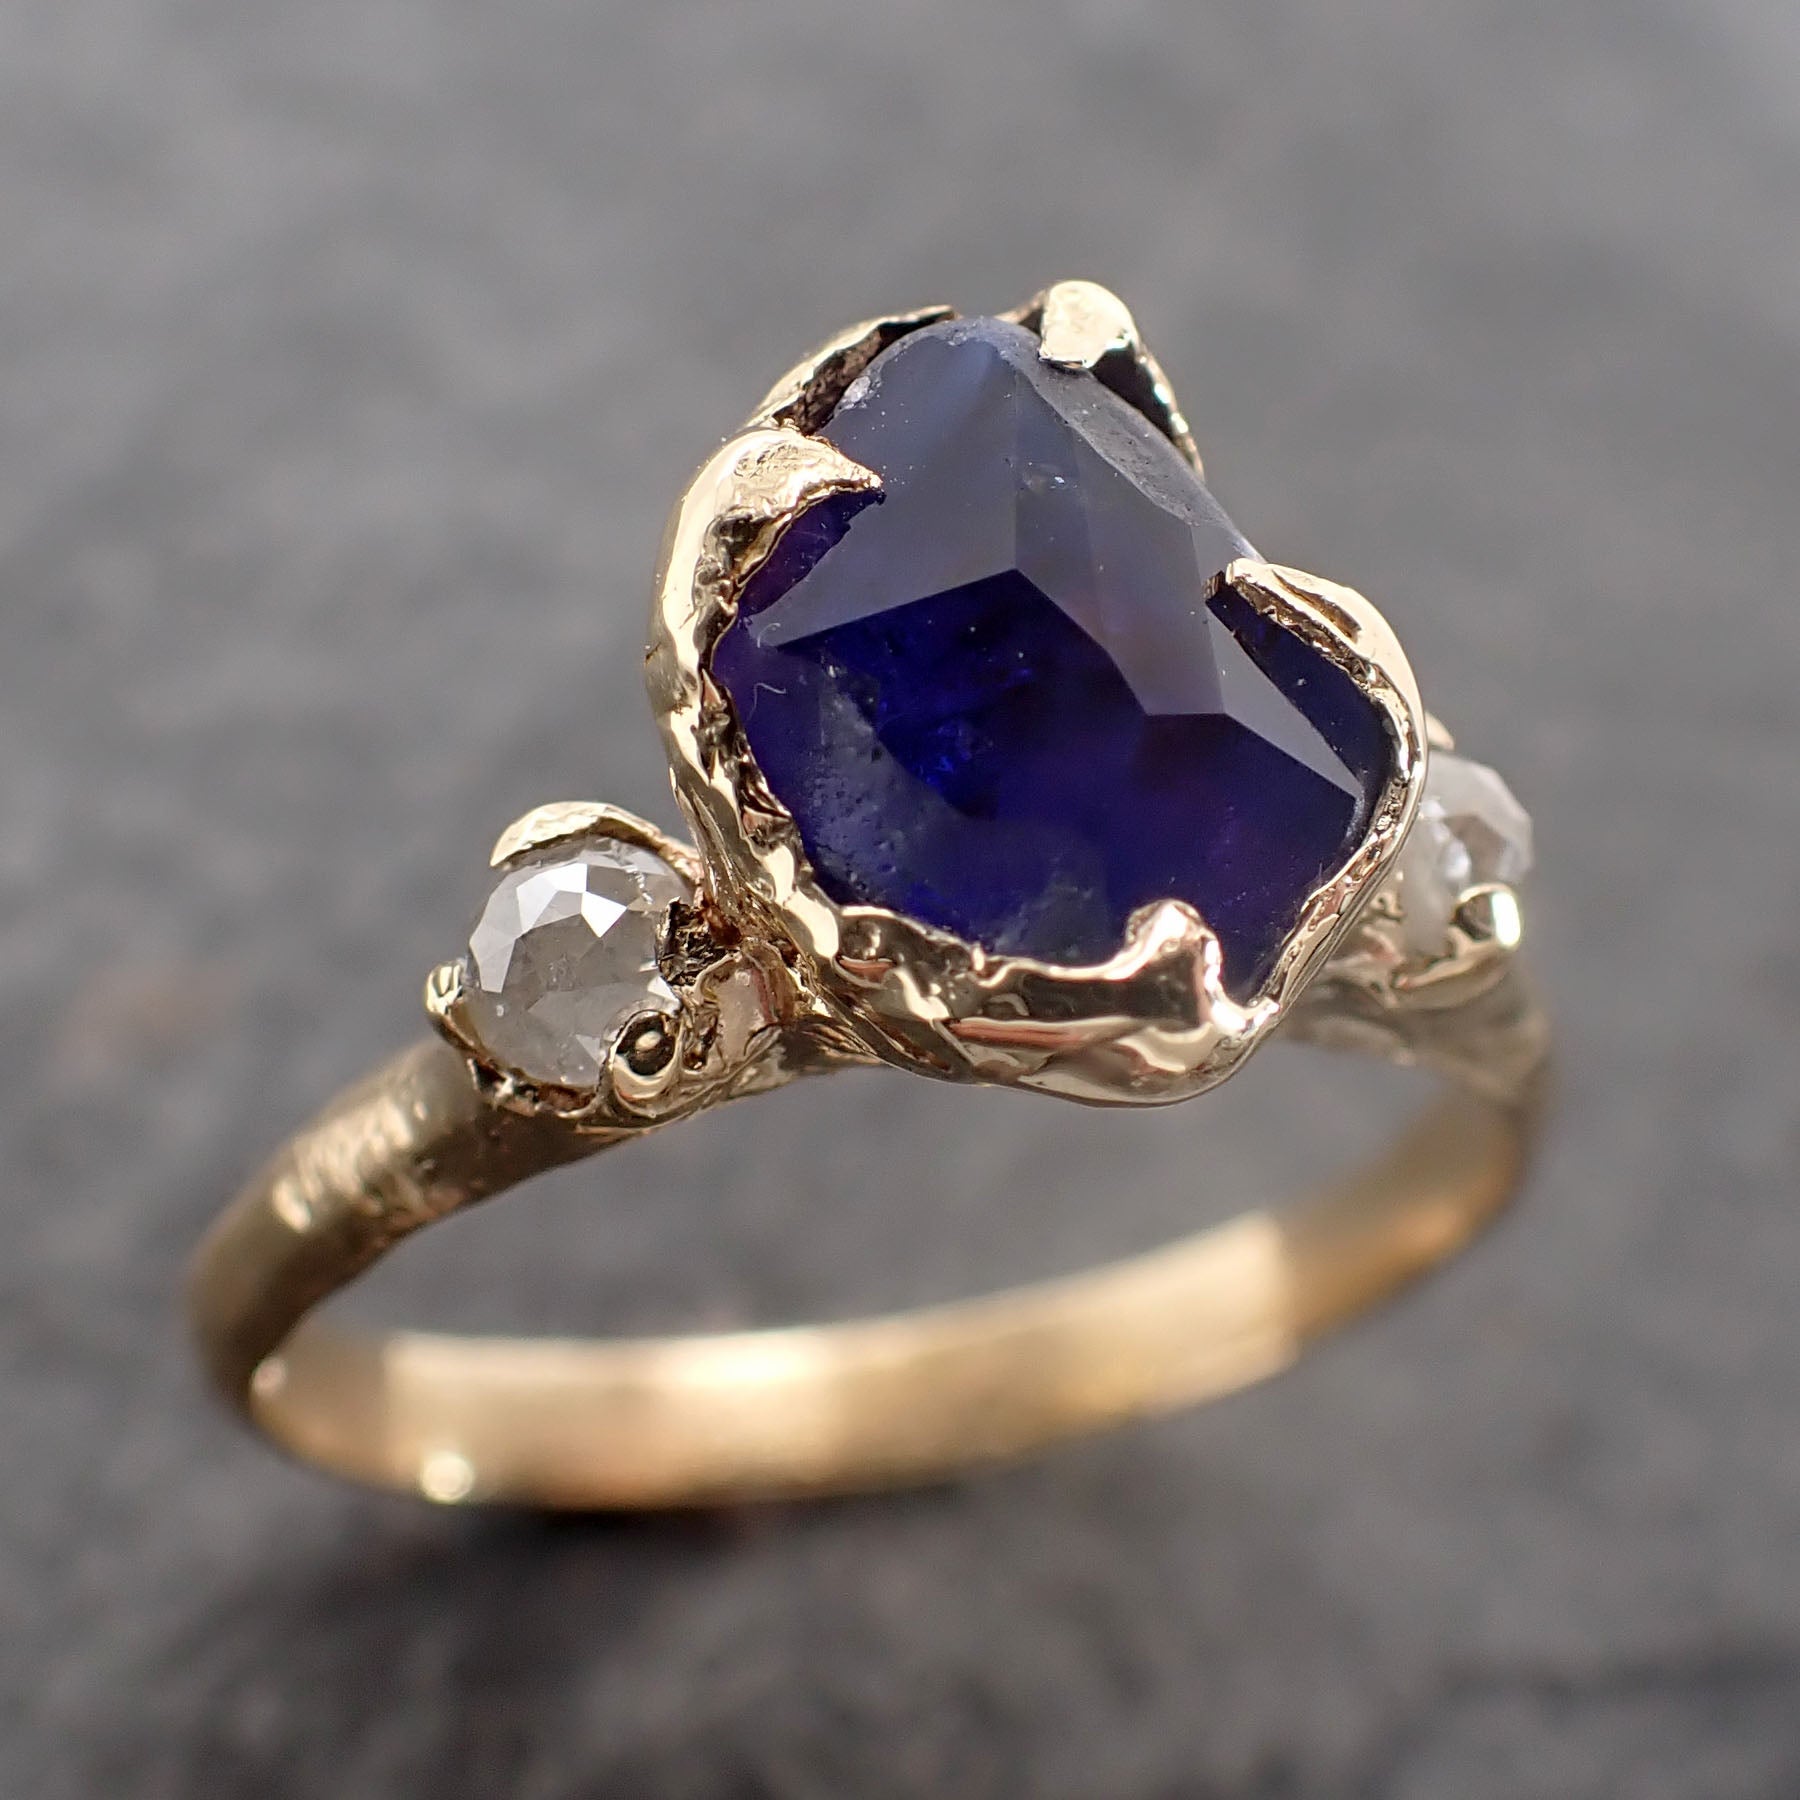 Partially Faceted blue Sapphire side diamonds Multi stone 18k Gold Engagement Ring Wedding Ring Custom Gemstone Ring 2517